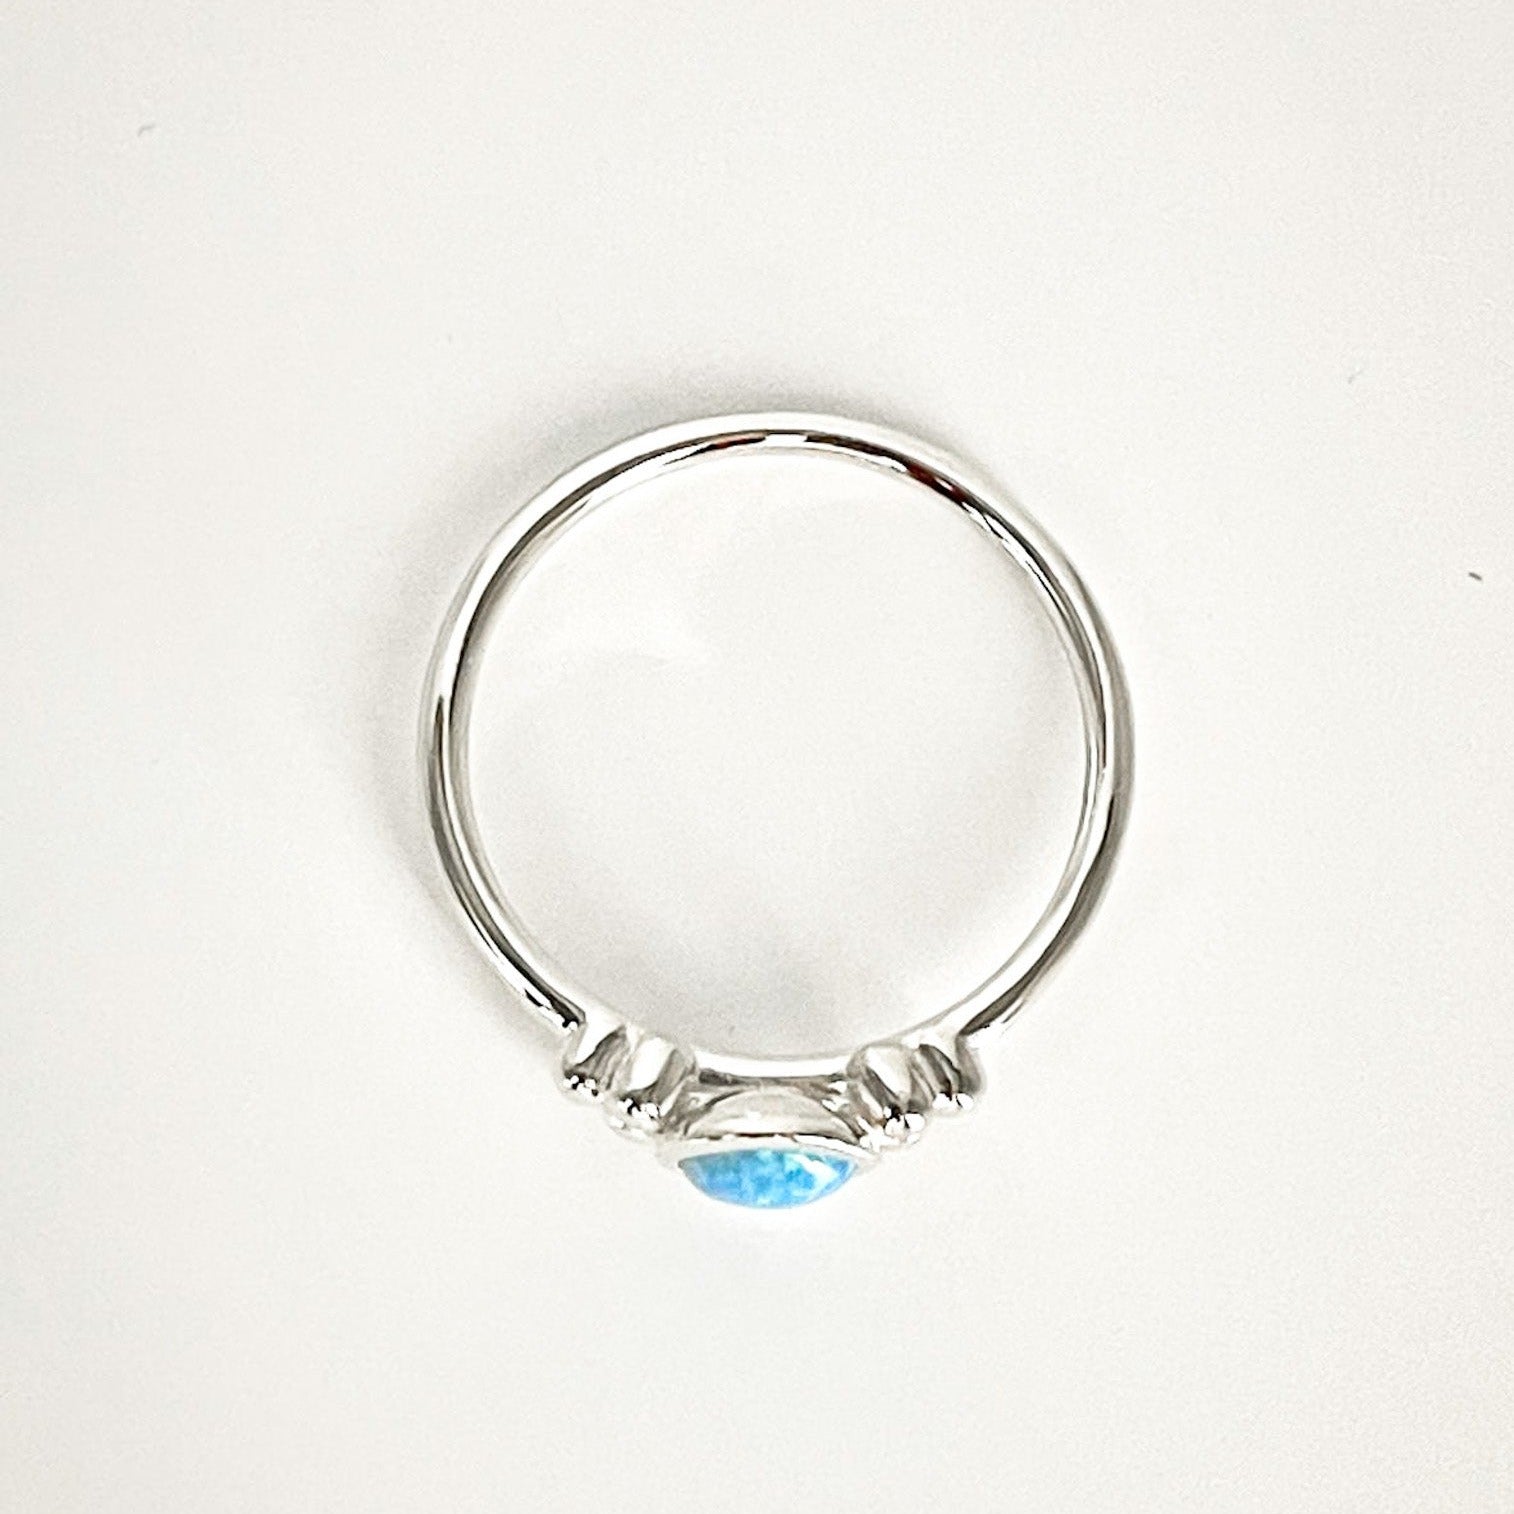 Opalite Ring in Sterling Silver